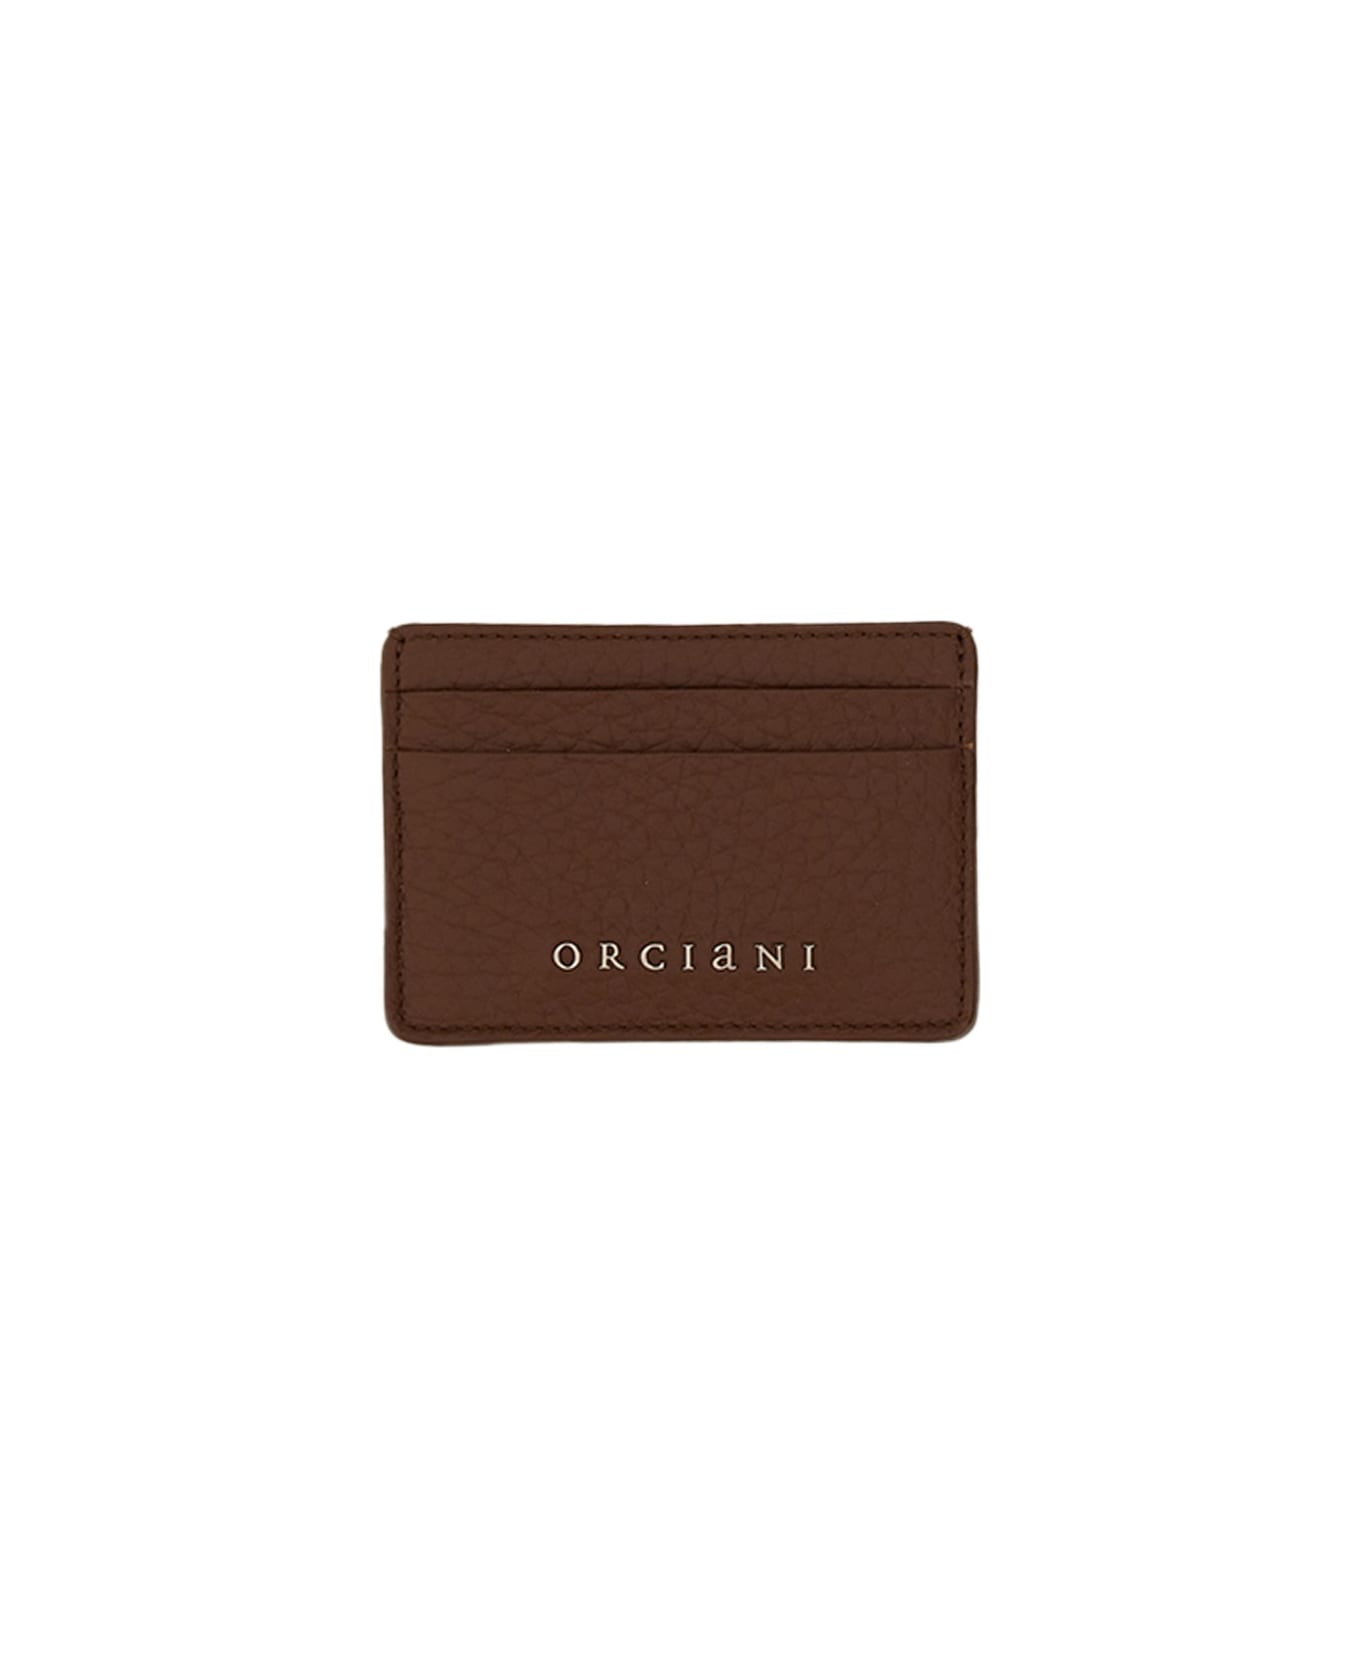 Orciani Soft Card Holder - BROWN 財布